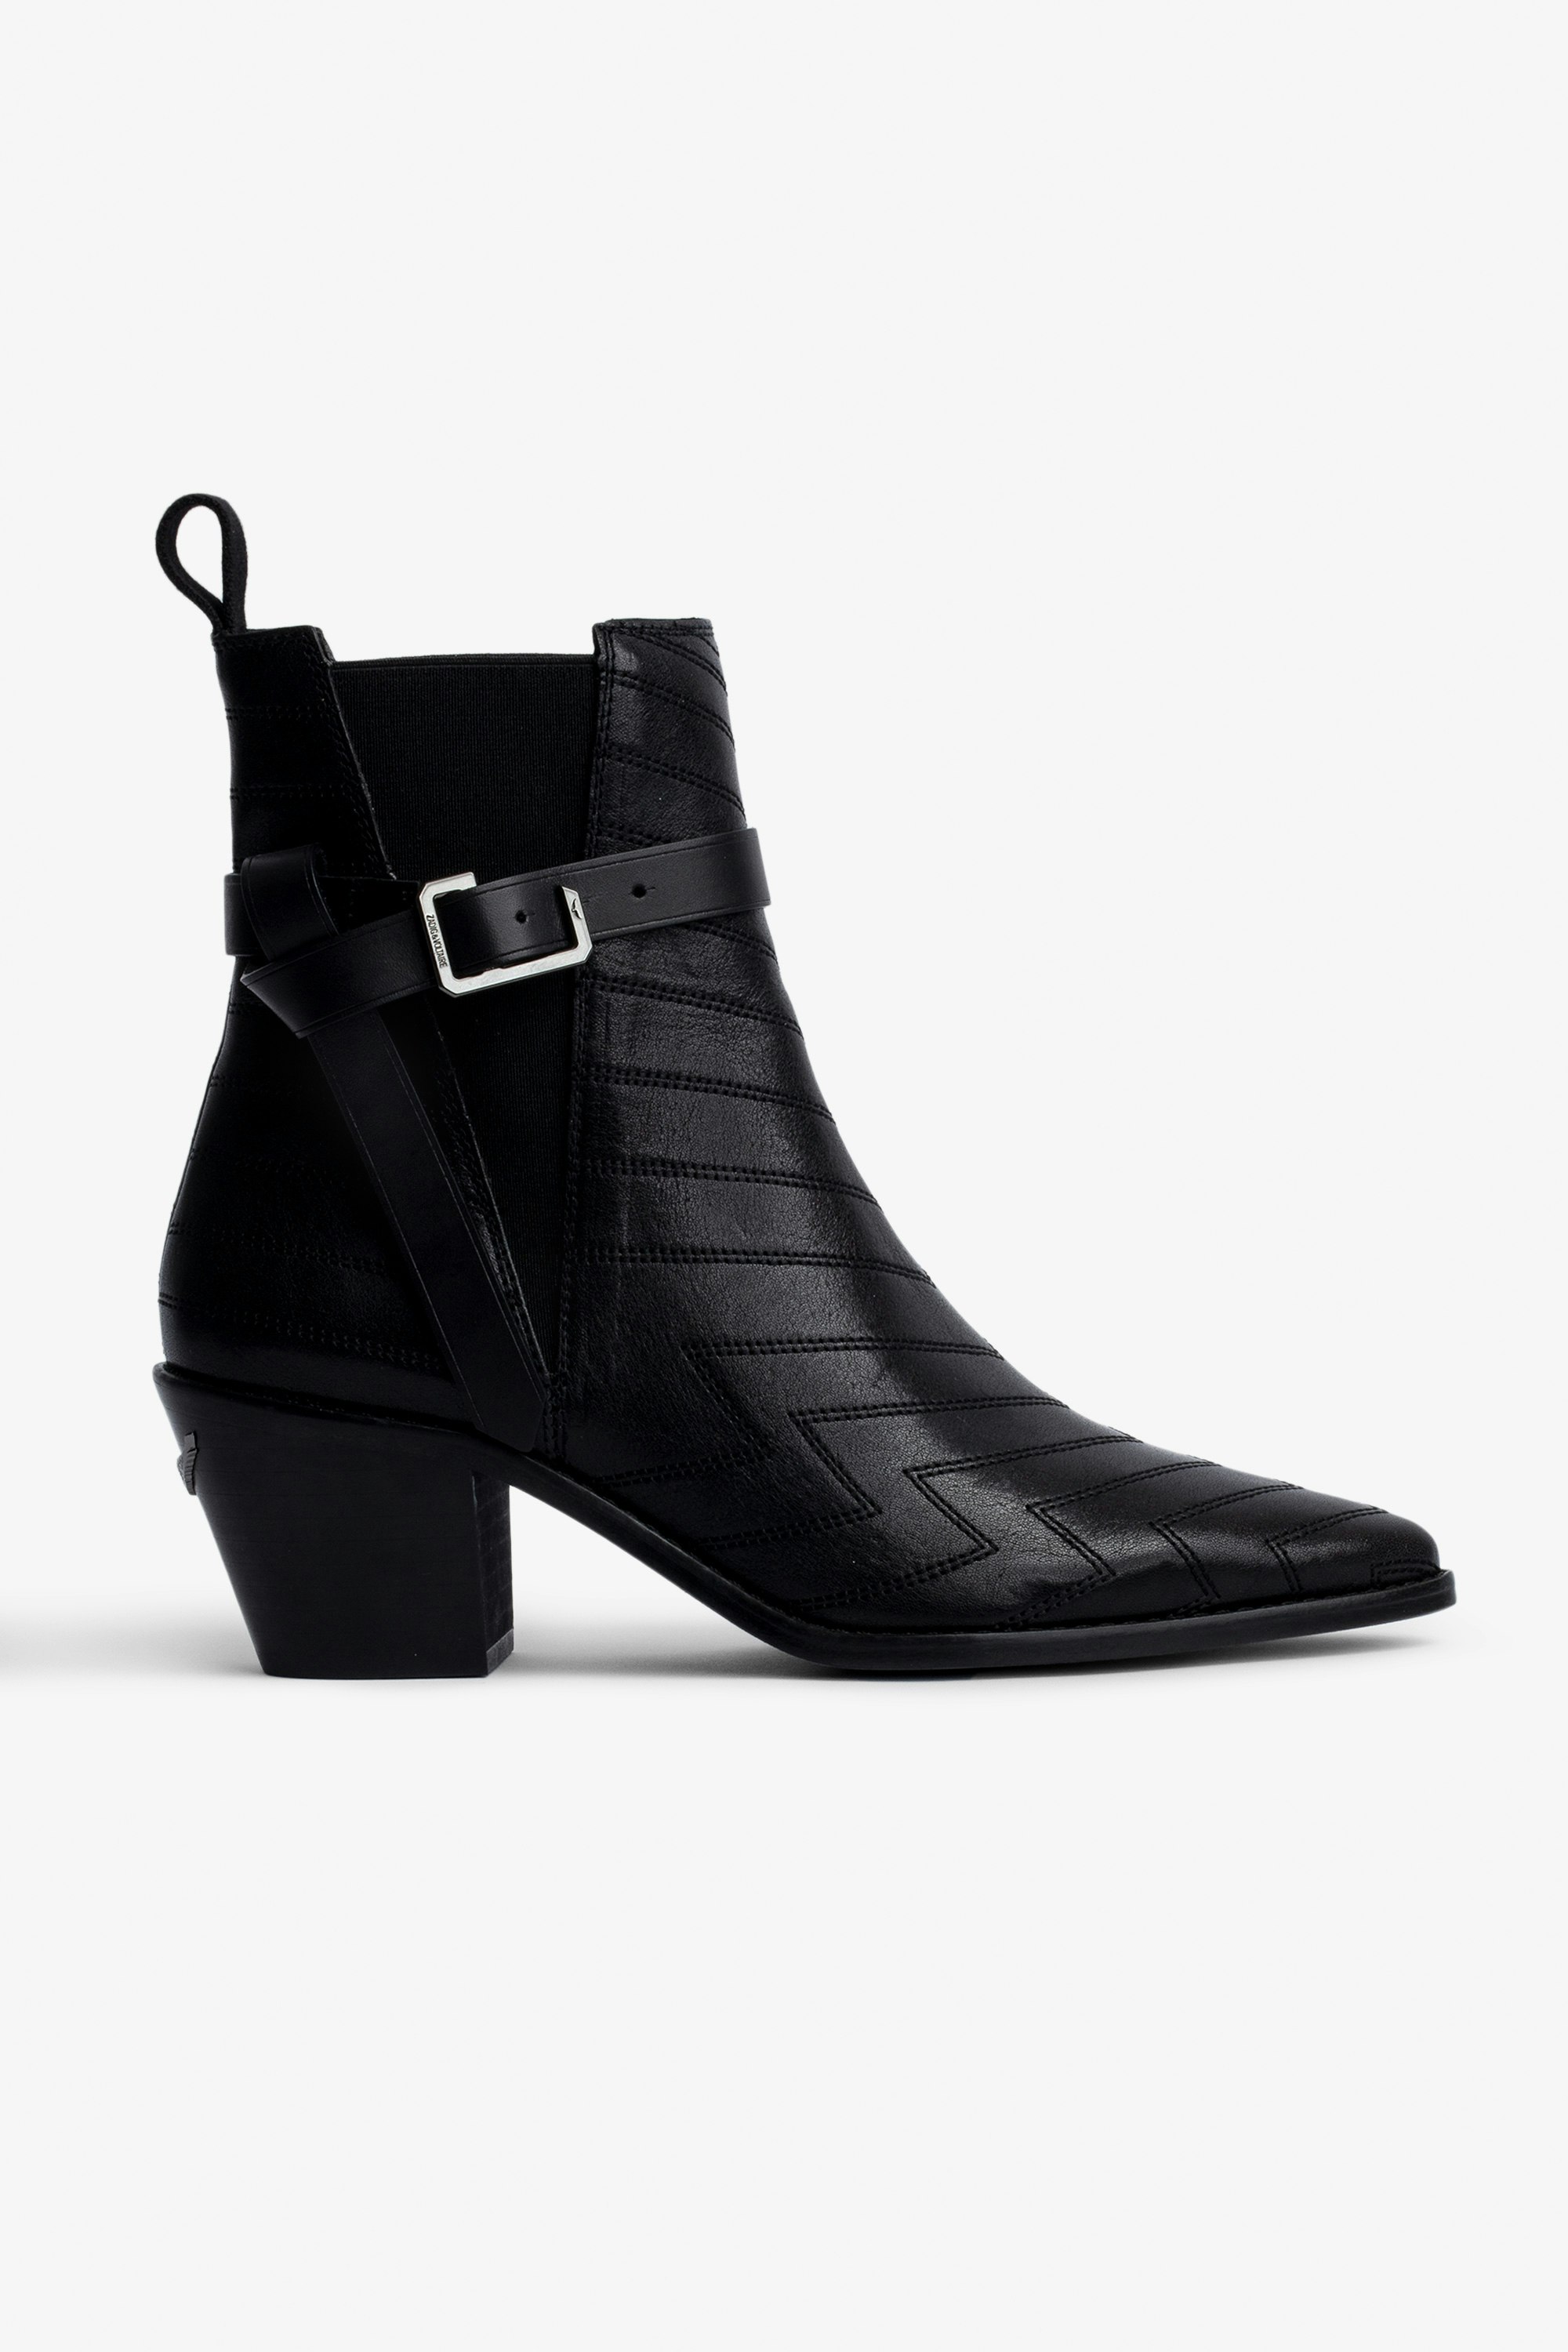 Tyler Ankle Boots - Women’s black leather ankle boots with topstitching and adjustable strap